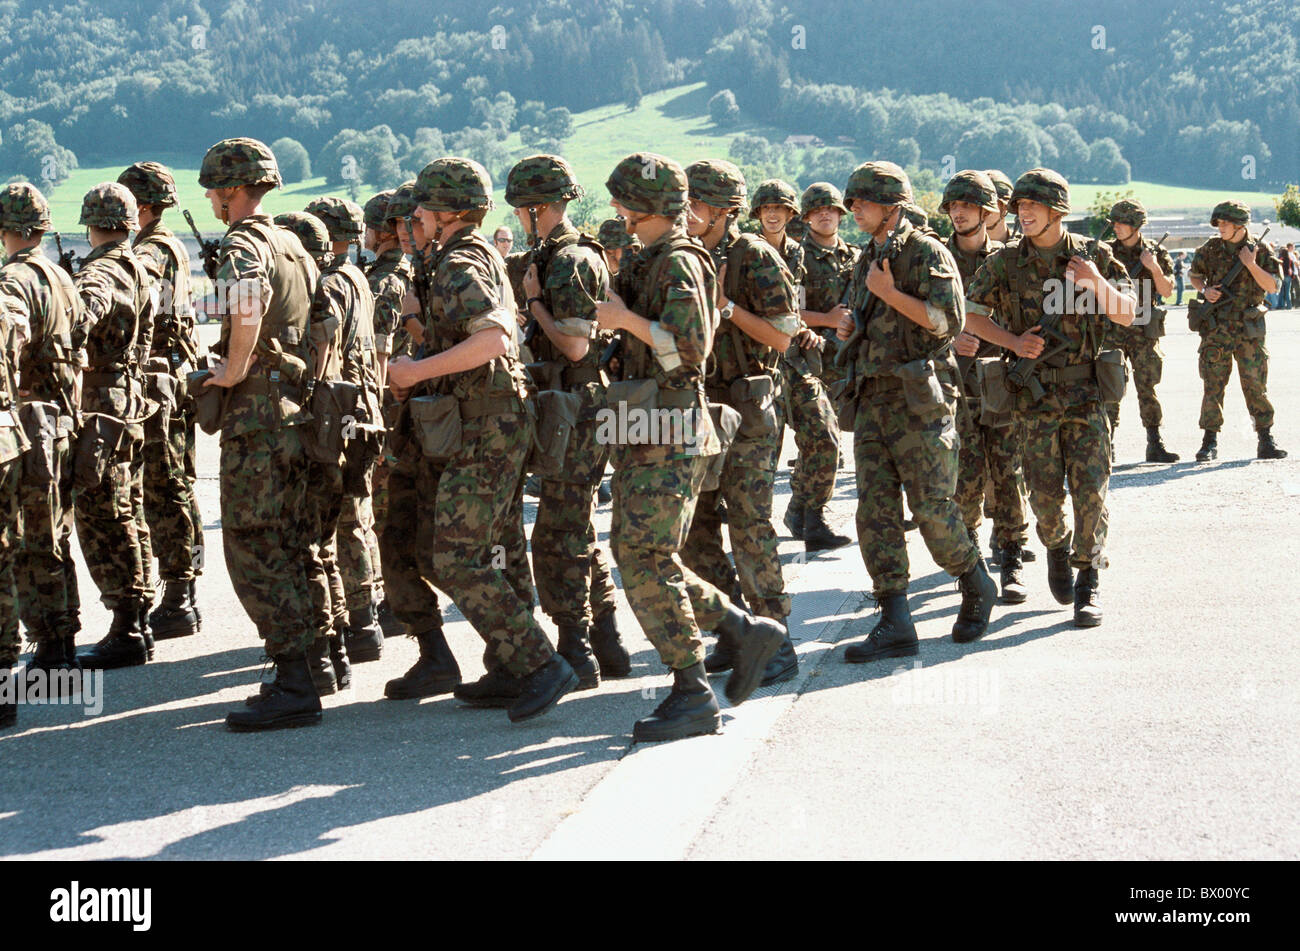 army military group men marsh march marching military no model release Switzerland Europe soldier unifor Stock Photo